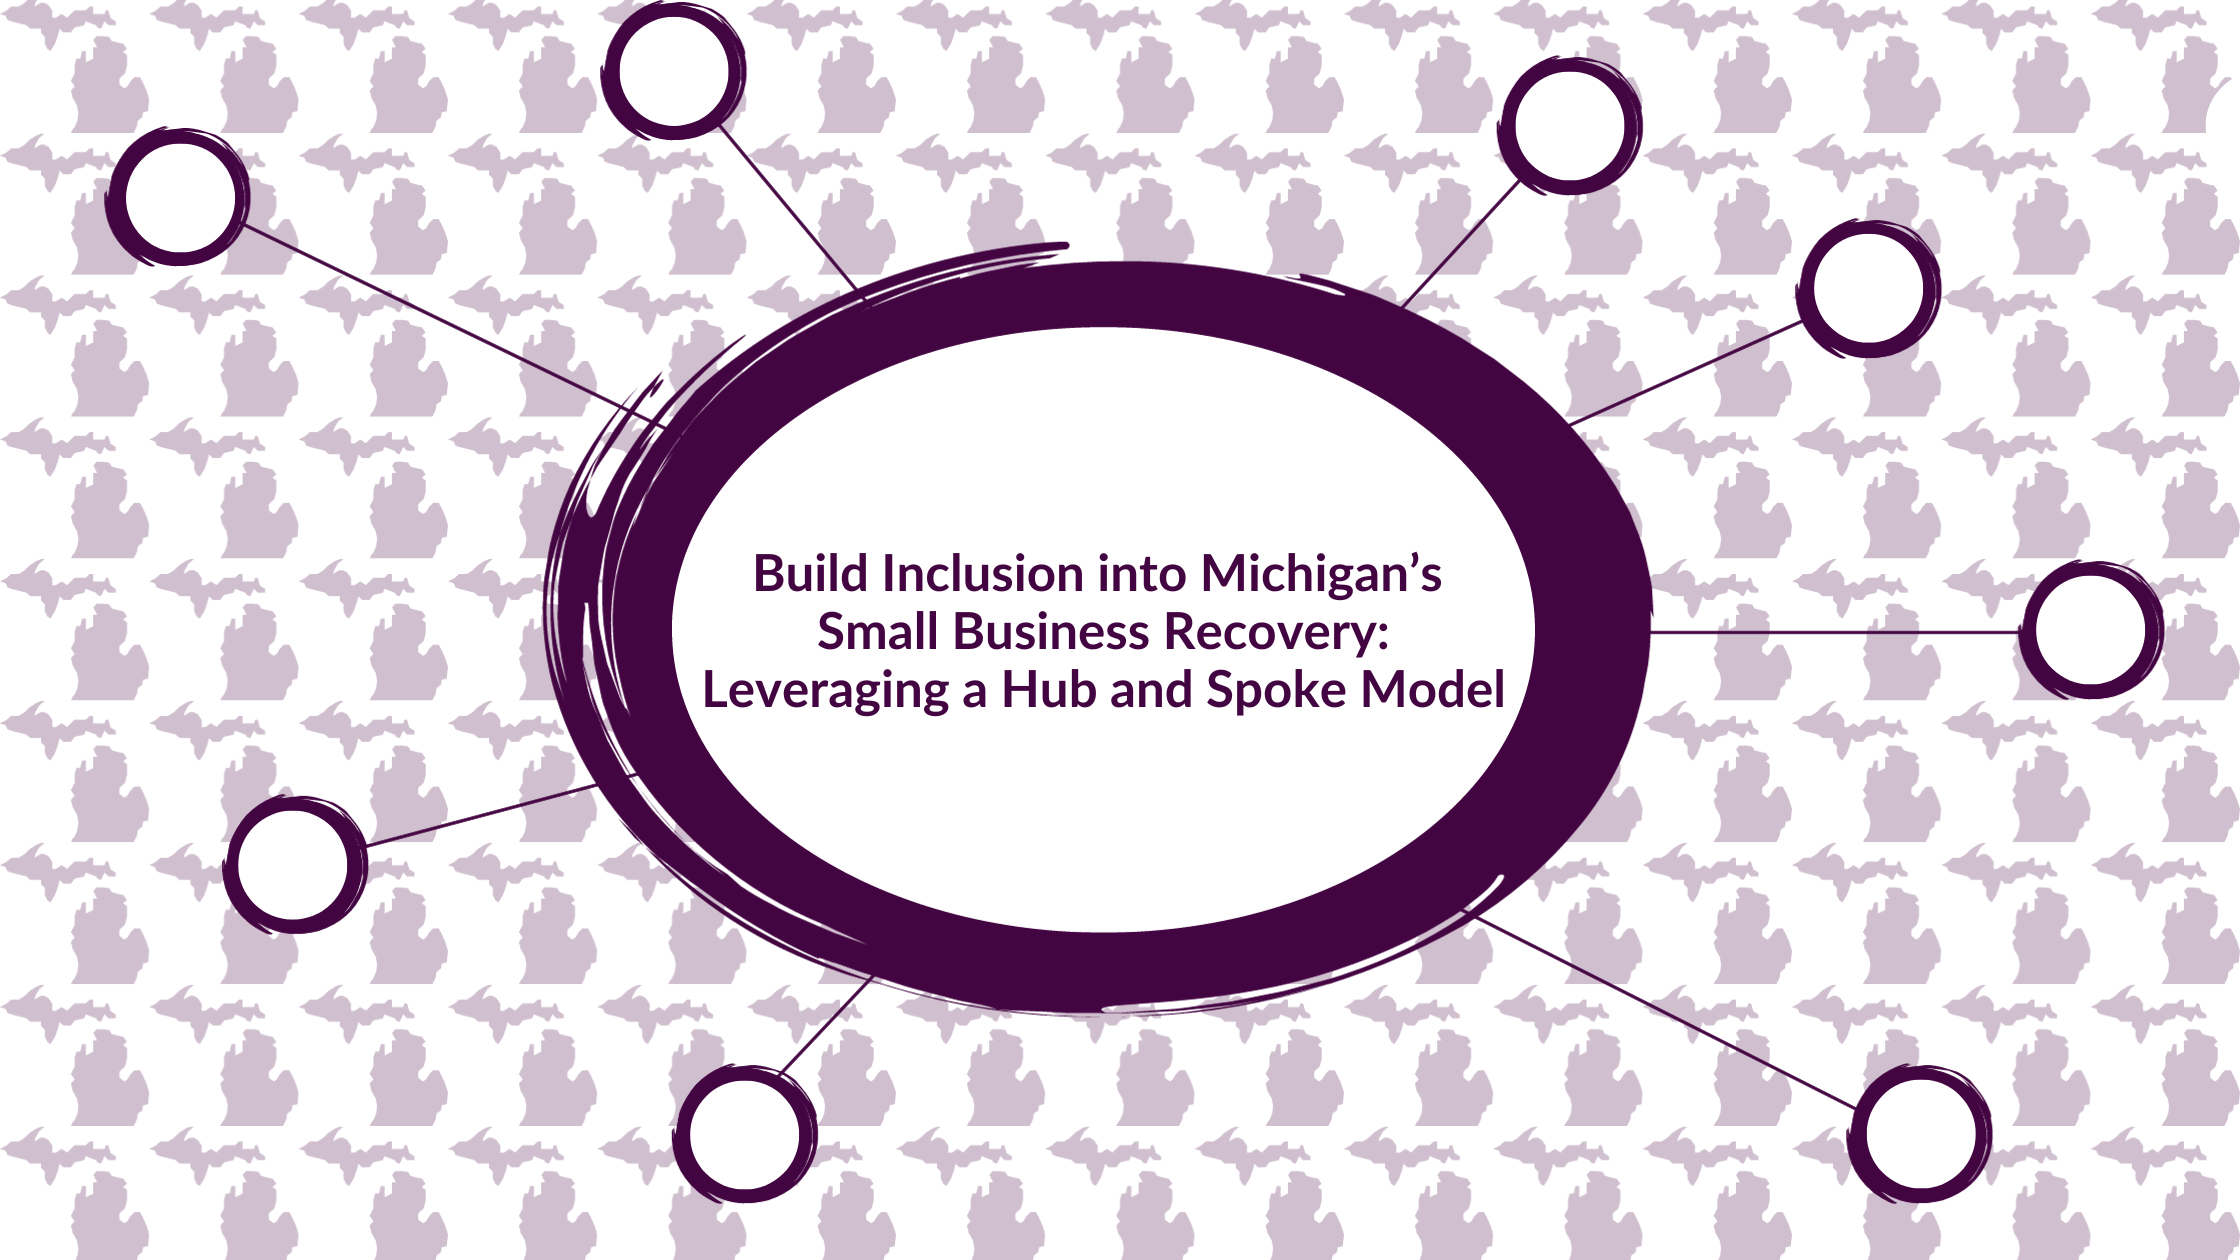 Blog Header Image to share Build Inclusion into Michigan’s Small Business Recovery: Leveraging a Hub and Spoke Model